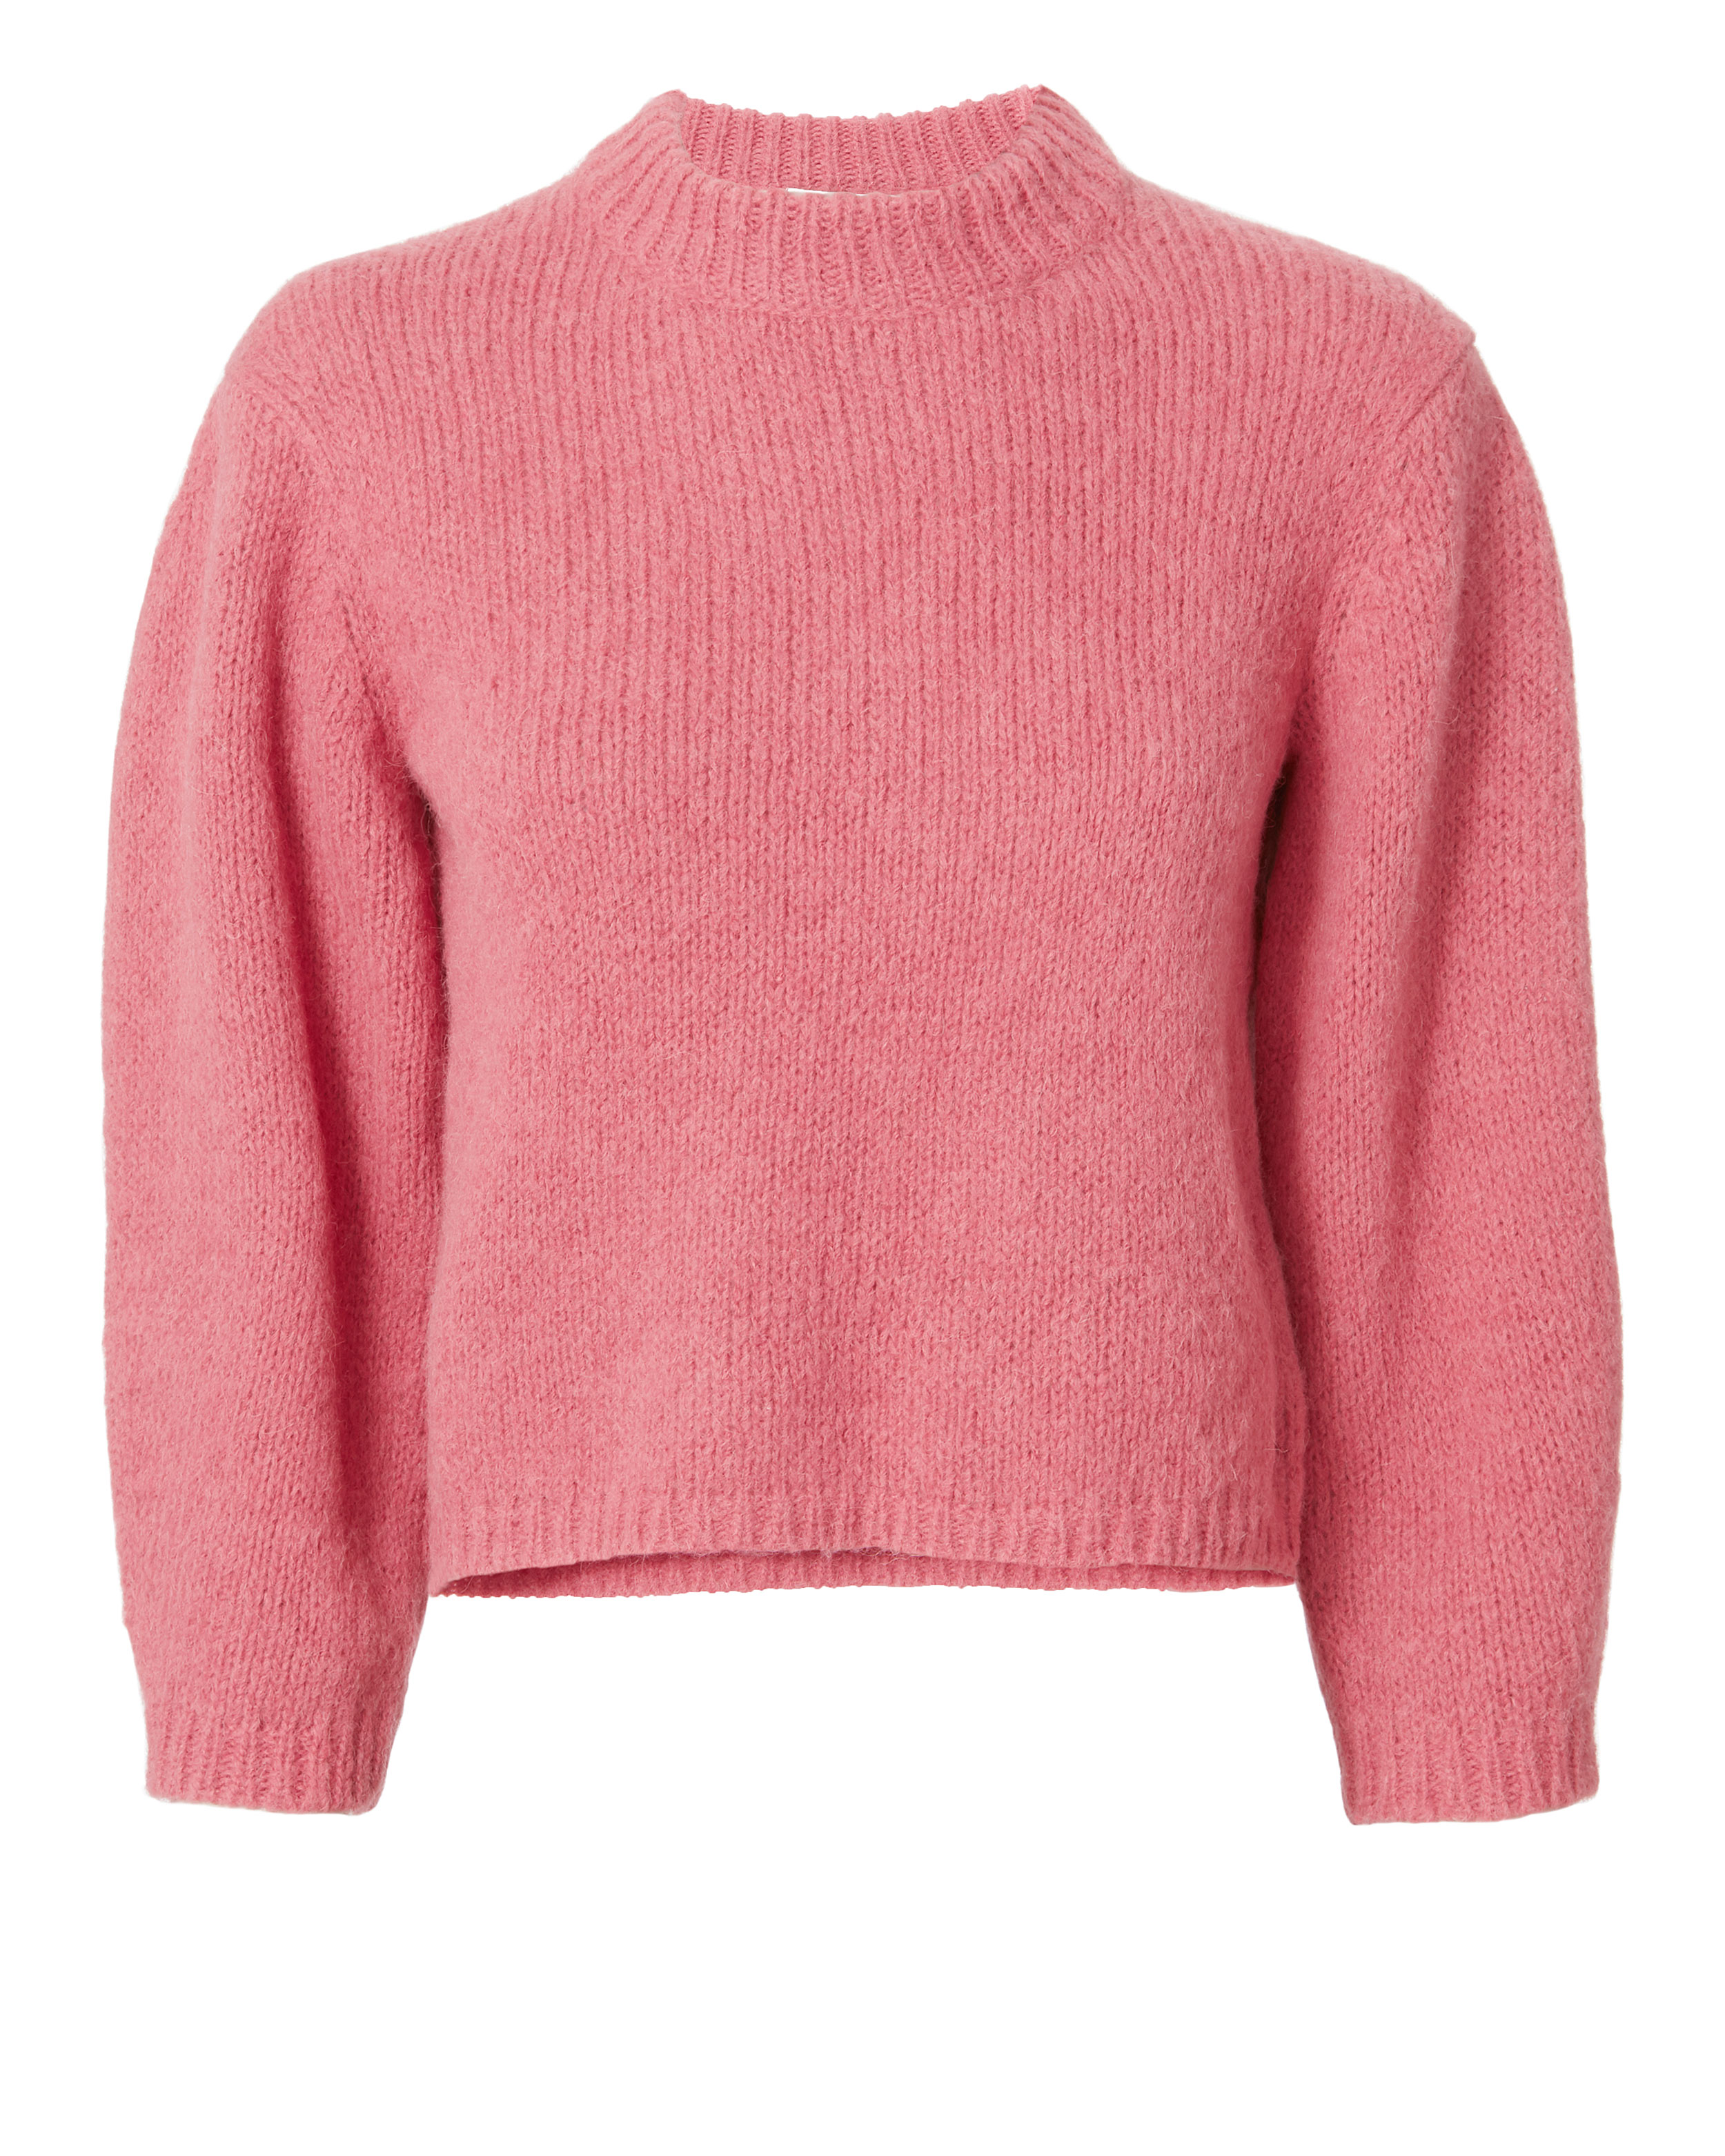 Cozette Cropped Pullover